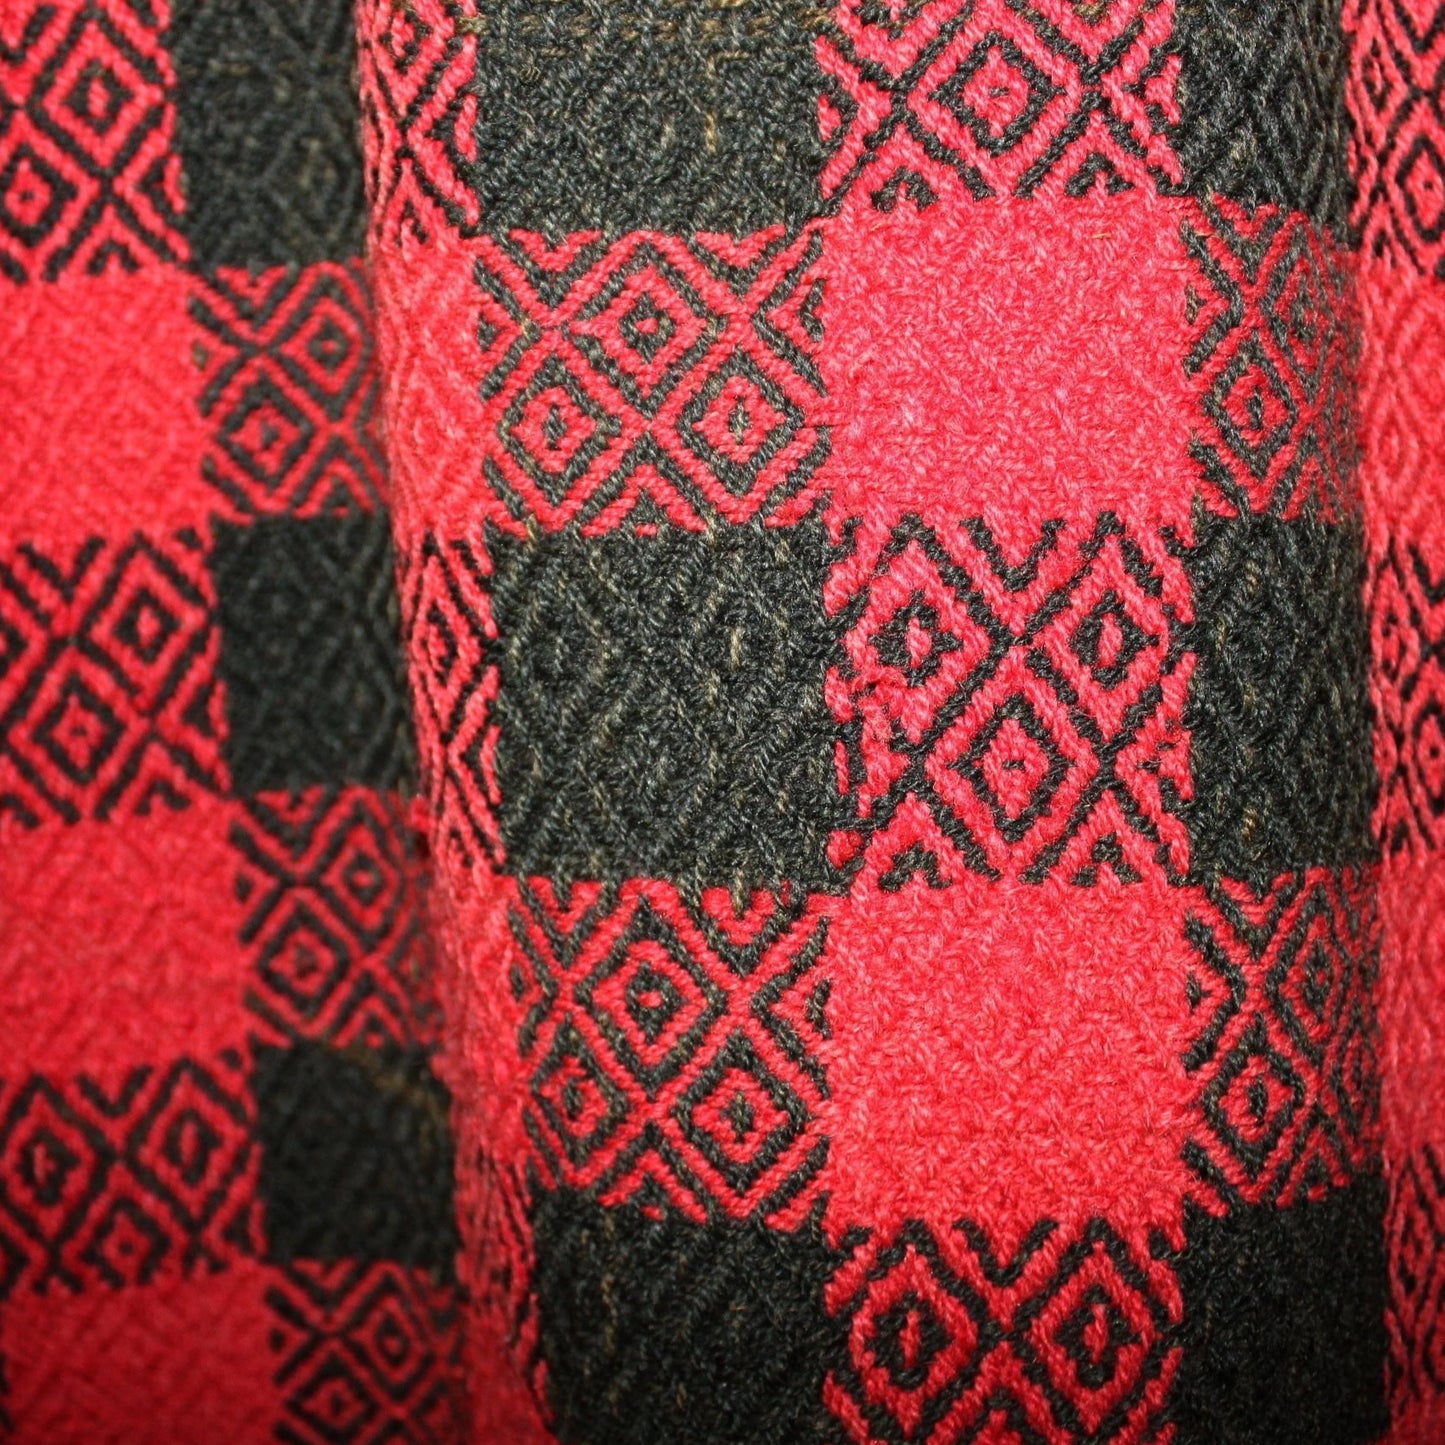 Antique Wool Woven Coverlet Blanket 1800s Red Black Intricate Checkerboard Geometric 66" X 92" rare design